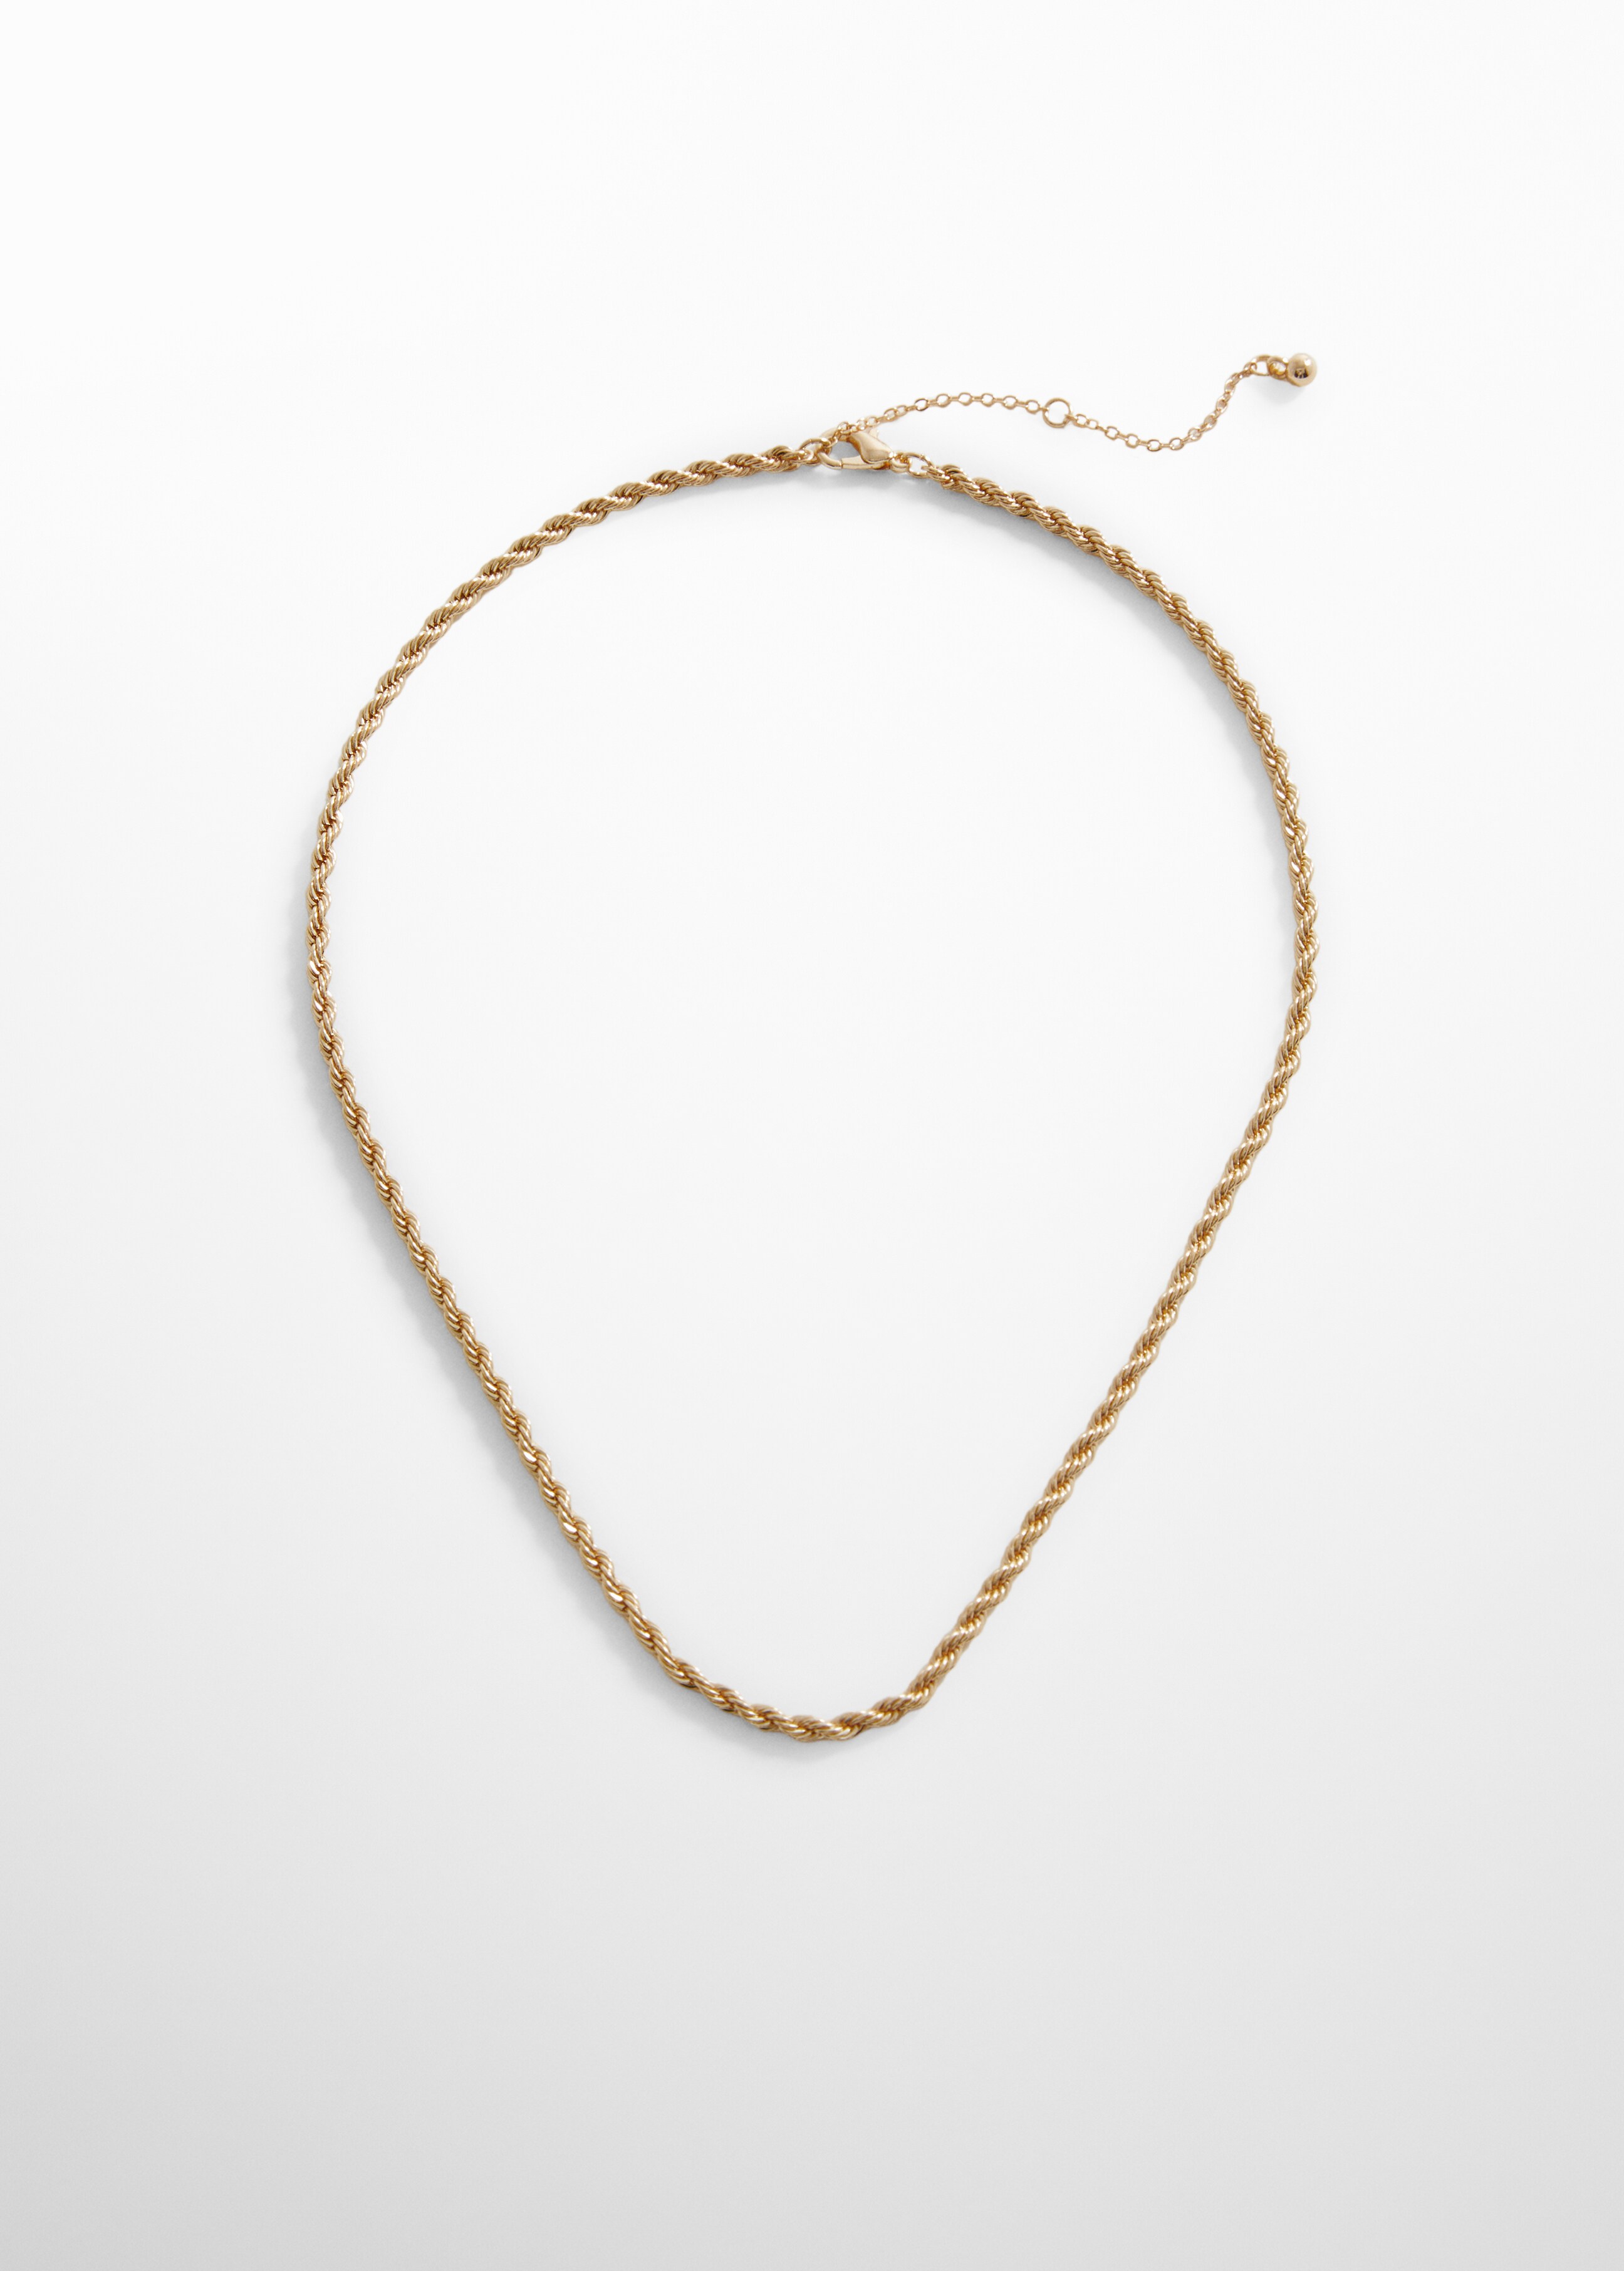 Interwoven chain necklace - Article without model